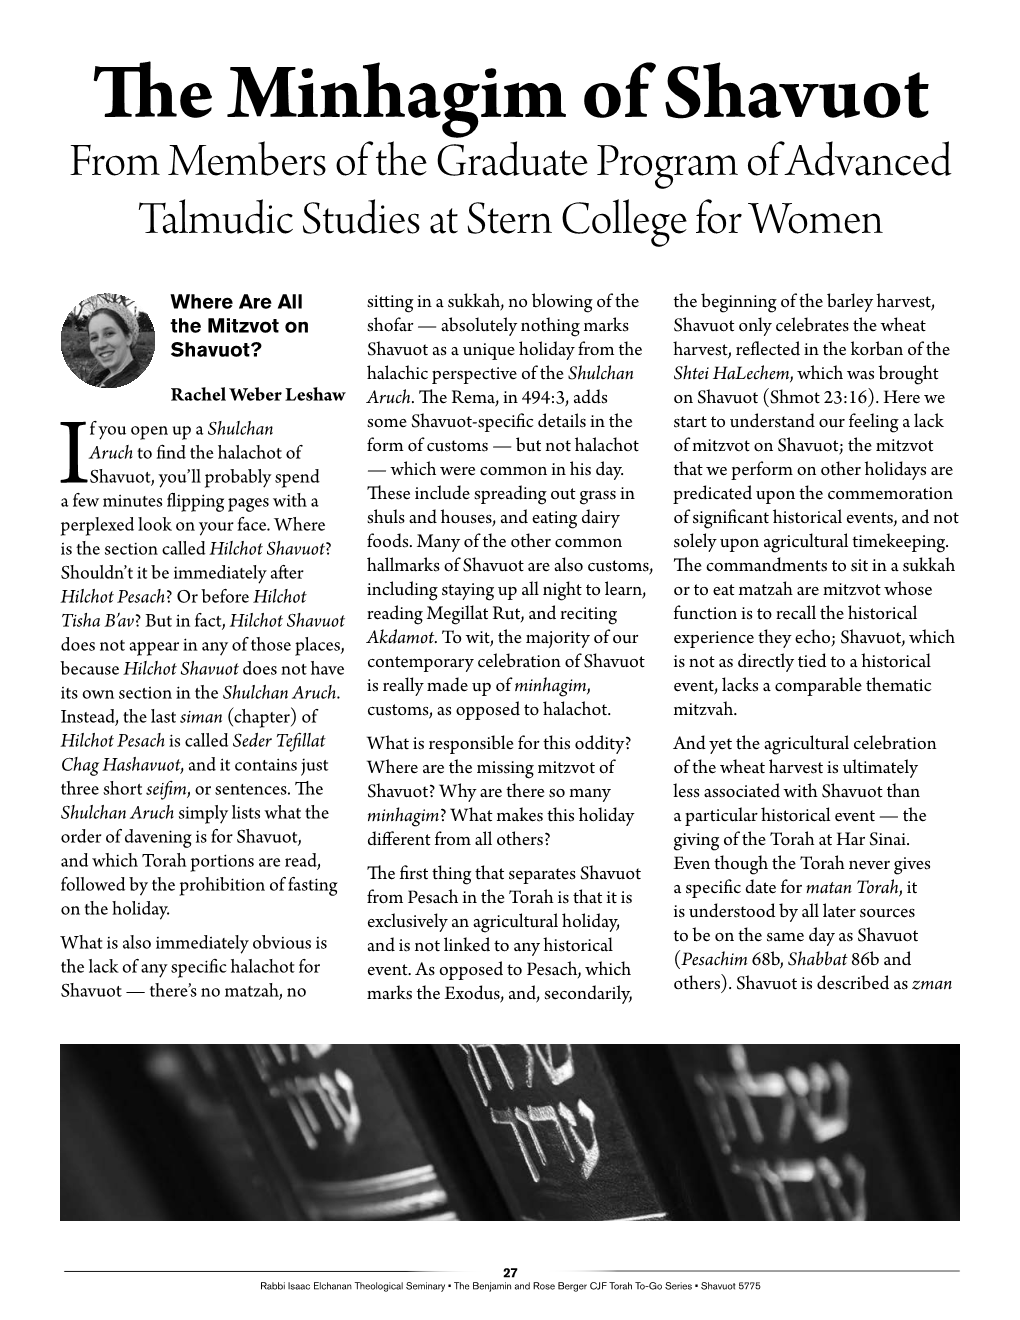 The Minhagim of Shavuot from Members of the Graduate Program of Advanced Talmudic Studies at Stern College for Women